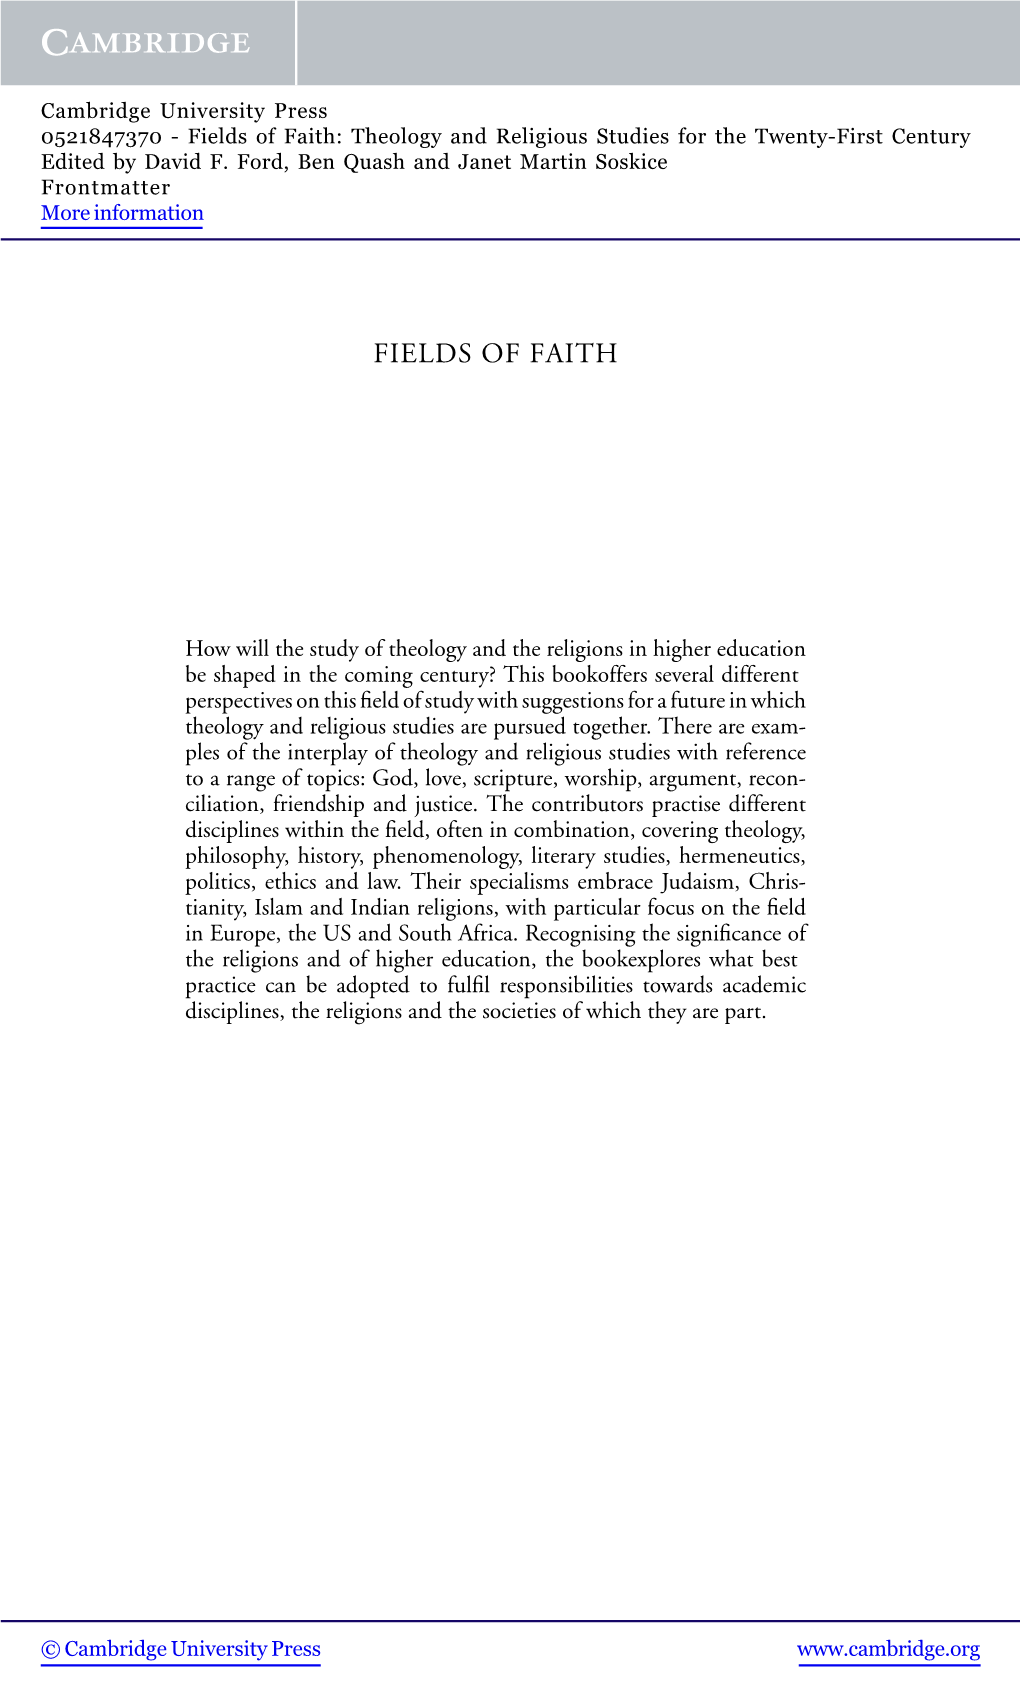 Fields of Faith: Theology and Religious Studies for the Twenty-First Century Edited by David F